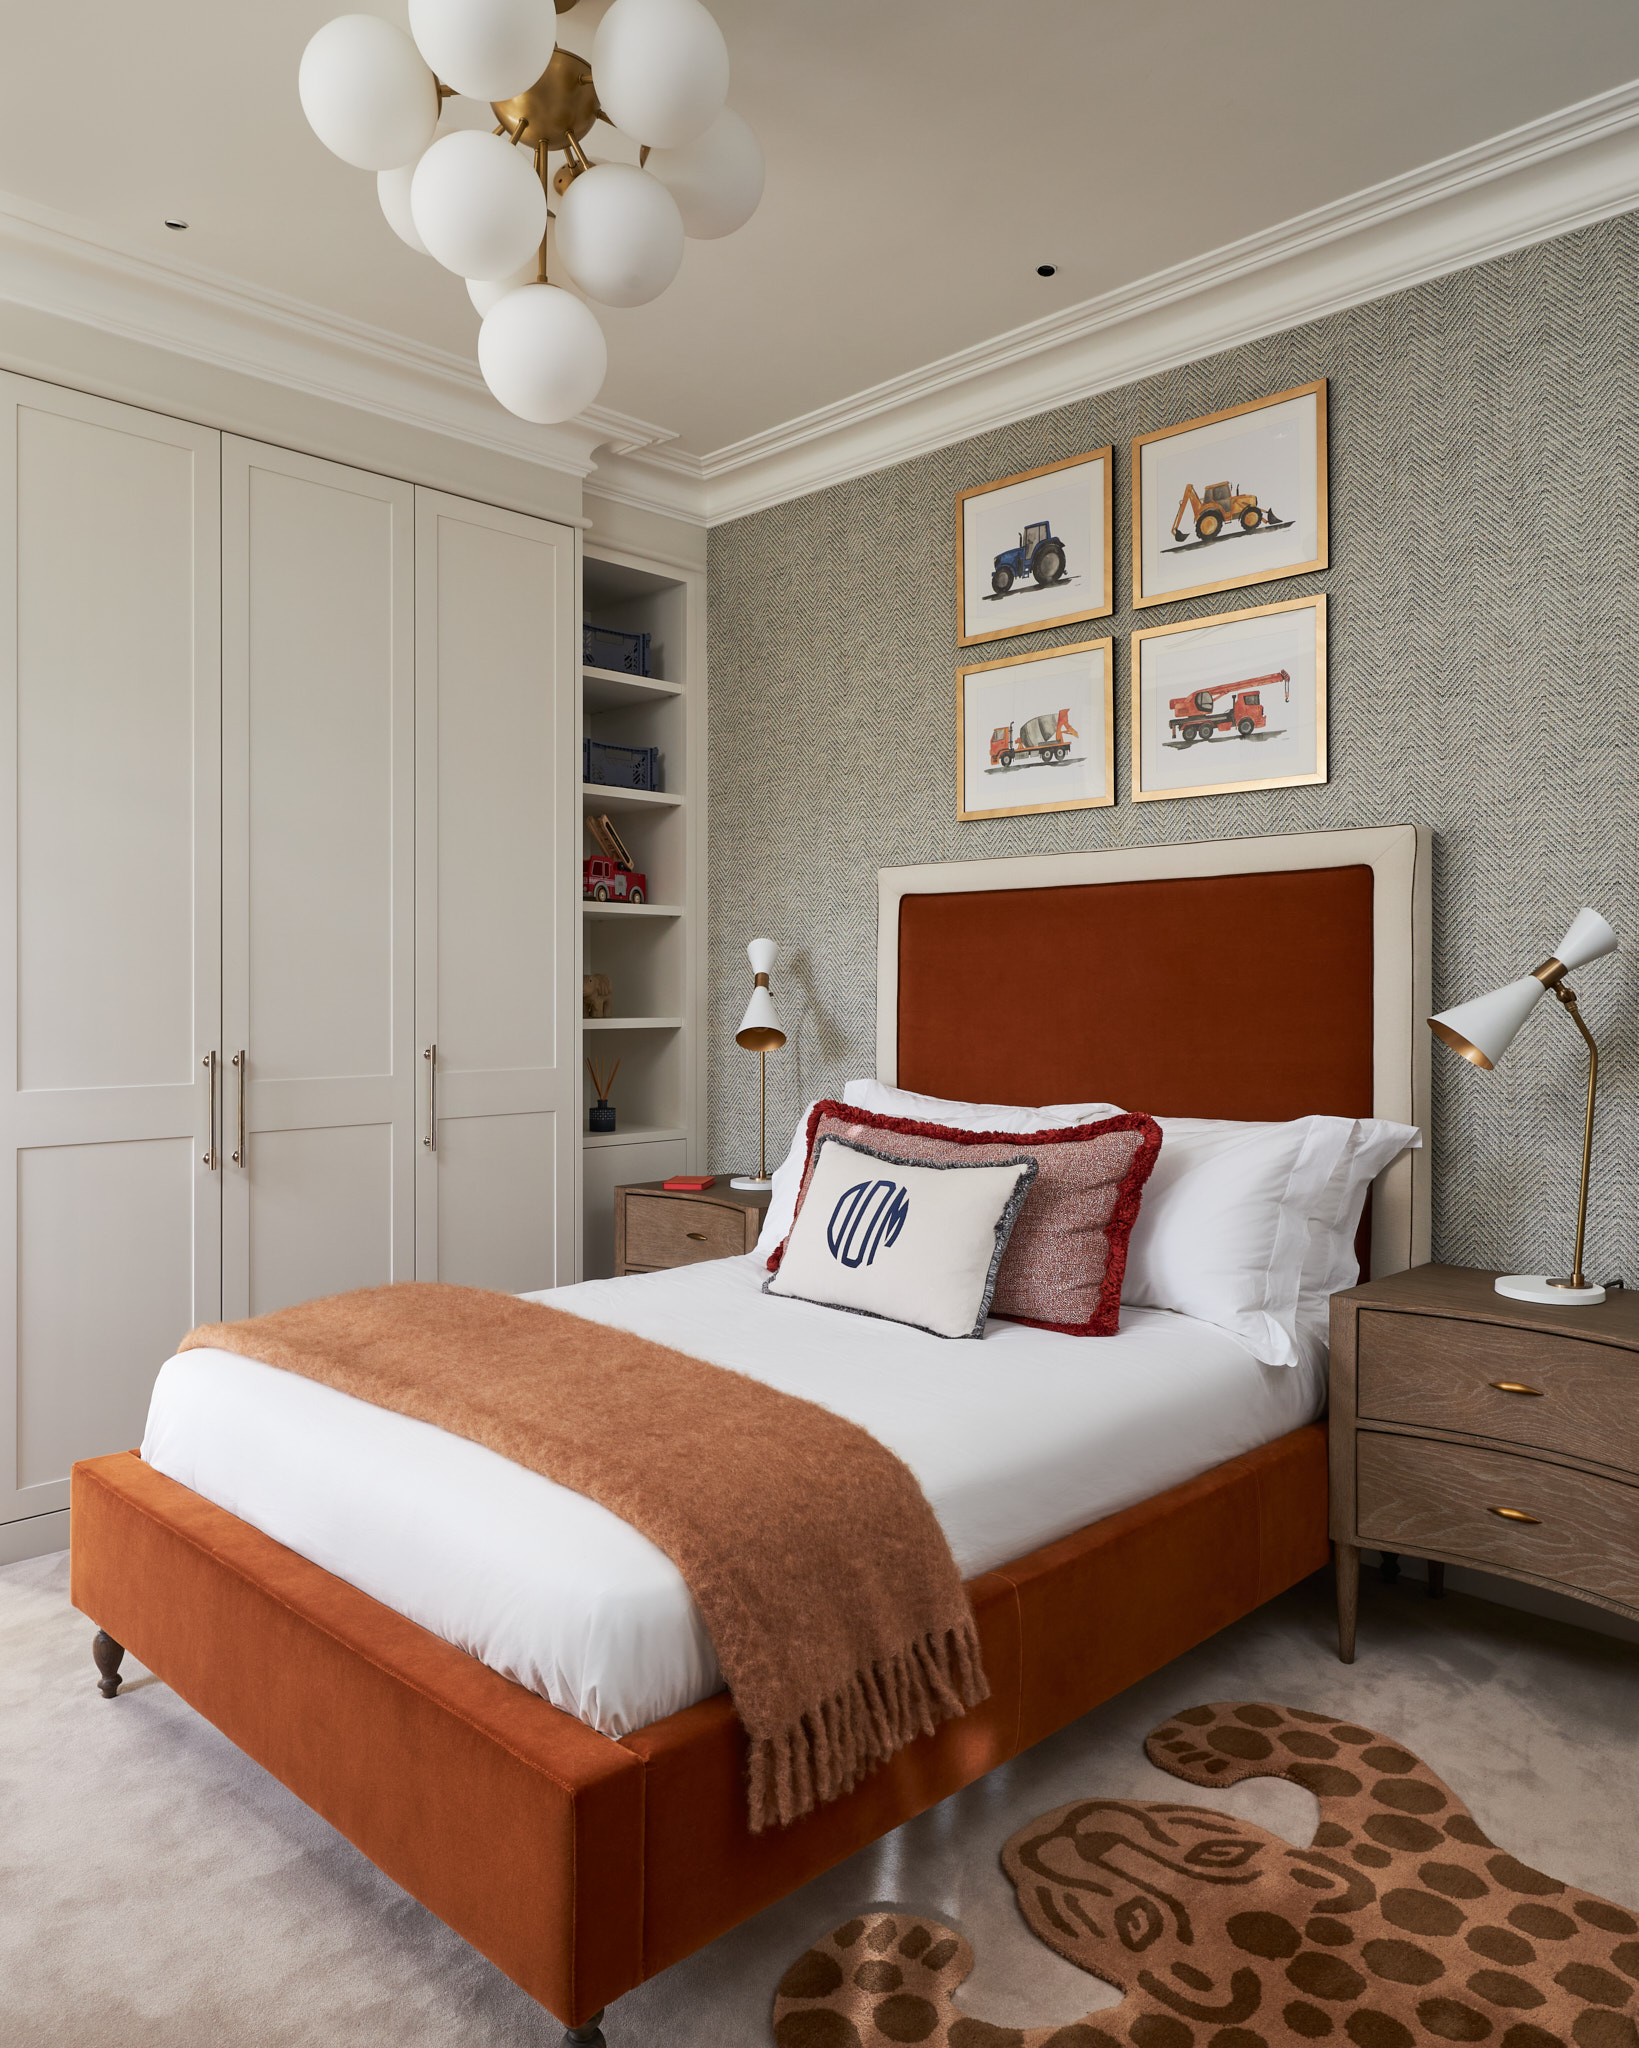 An elegant child's bedroom incorporating simple 2 panel Shaker hand painted wardrobes. Built to the ceiling with the plaster room coving running around the face of the furniture and finished in Little Greene Slaked Lime 149 Mid paint.